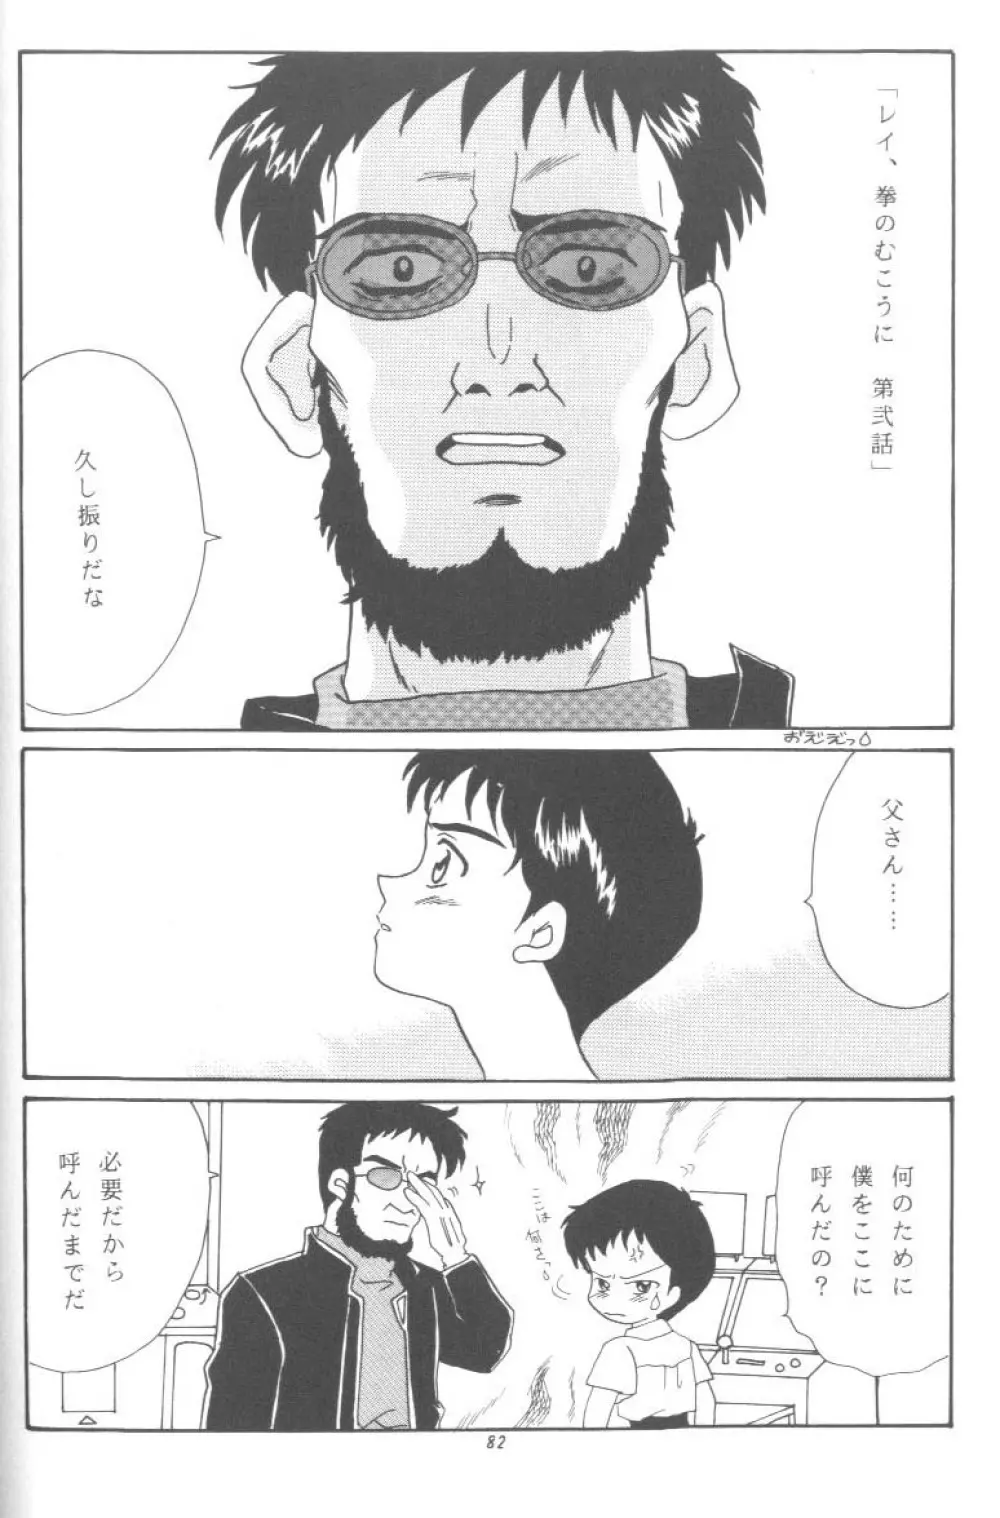 From The Neon Genesis 02 82ページ